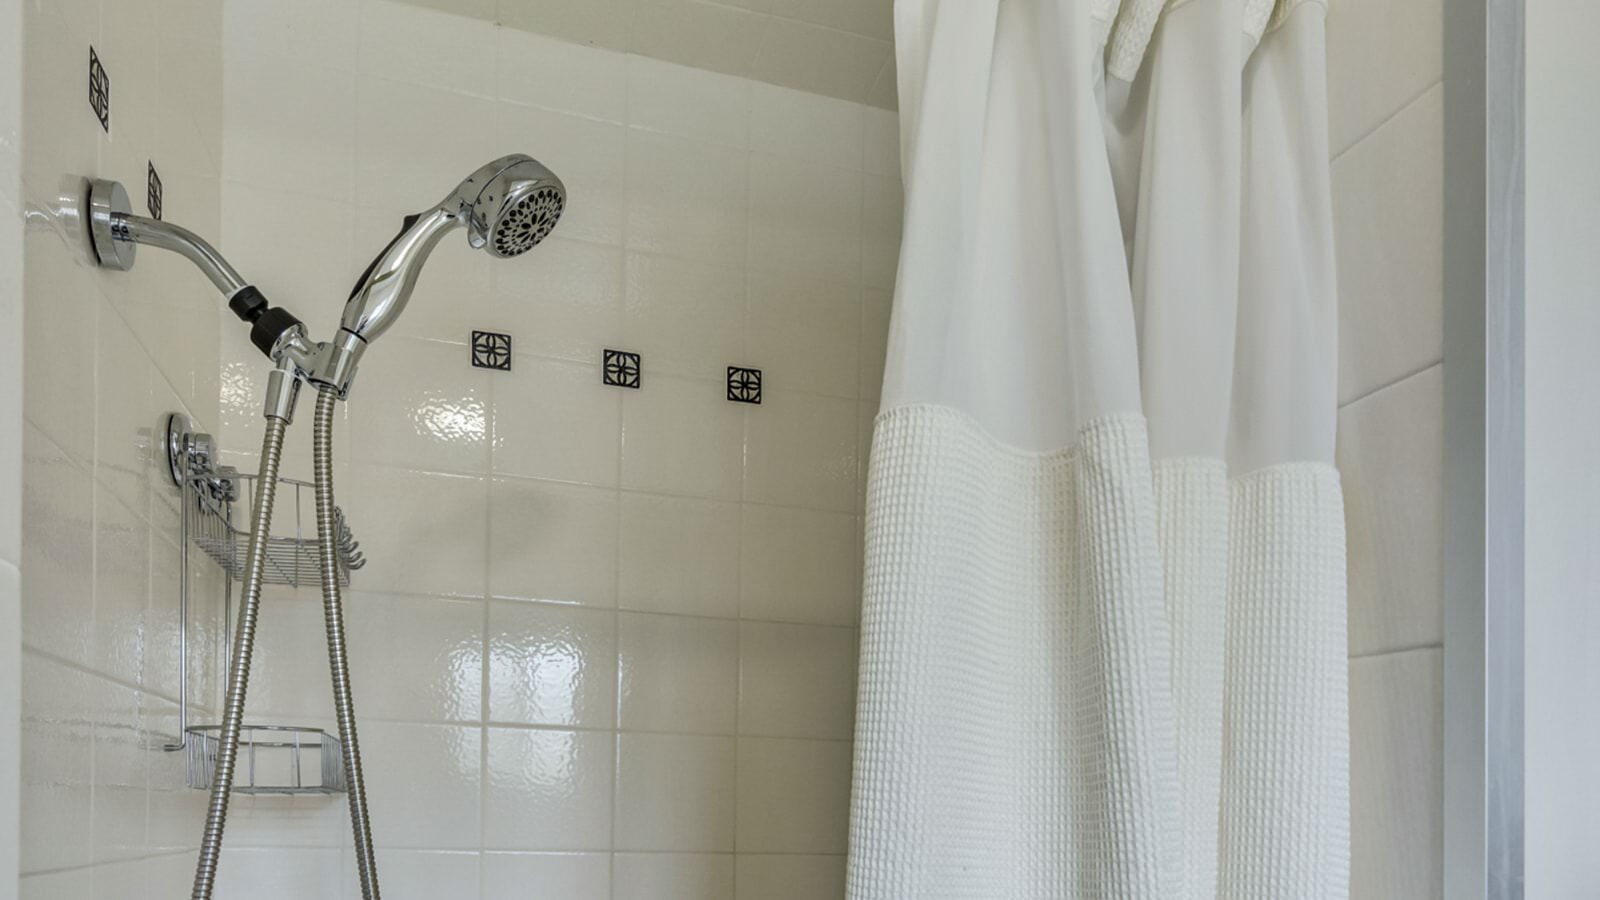 Close up view of stainless steel hand-held shower head in white tiled stand up shower